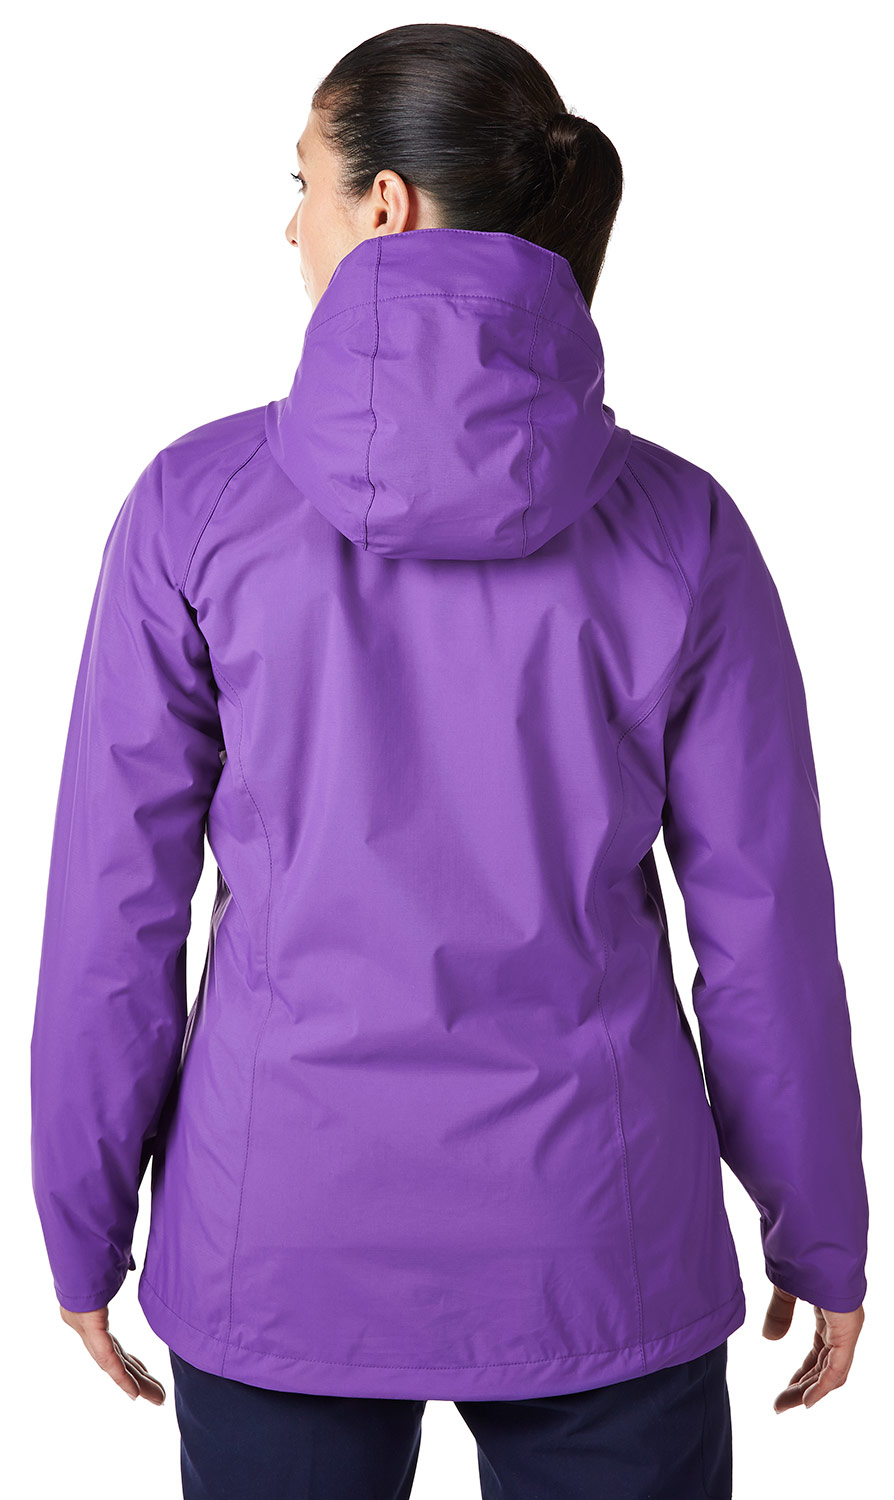 Berghaus Stormcloud Womens Waterproof Jacket for protection and style